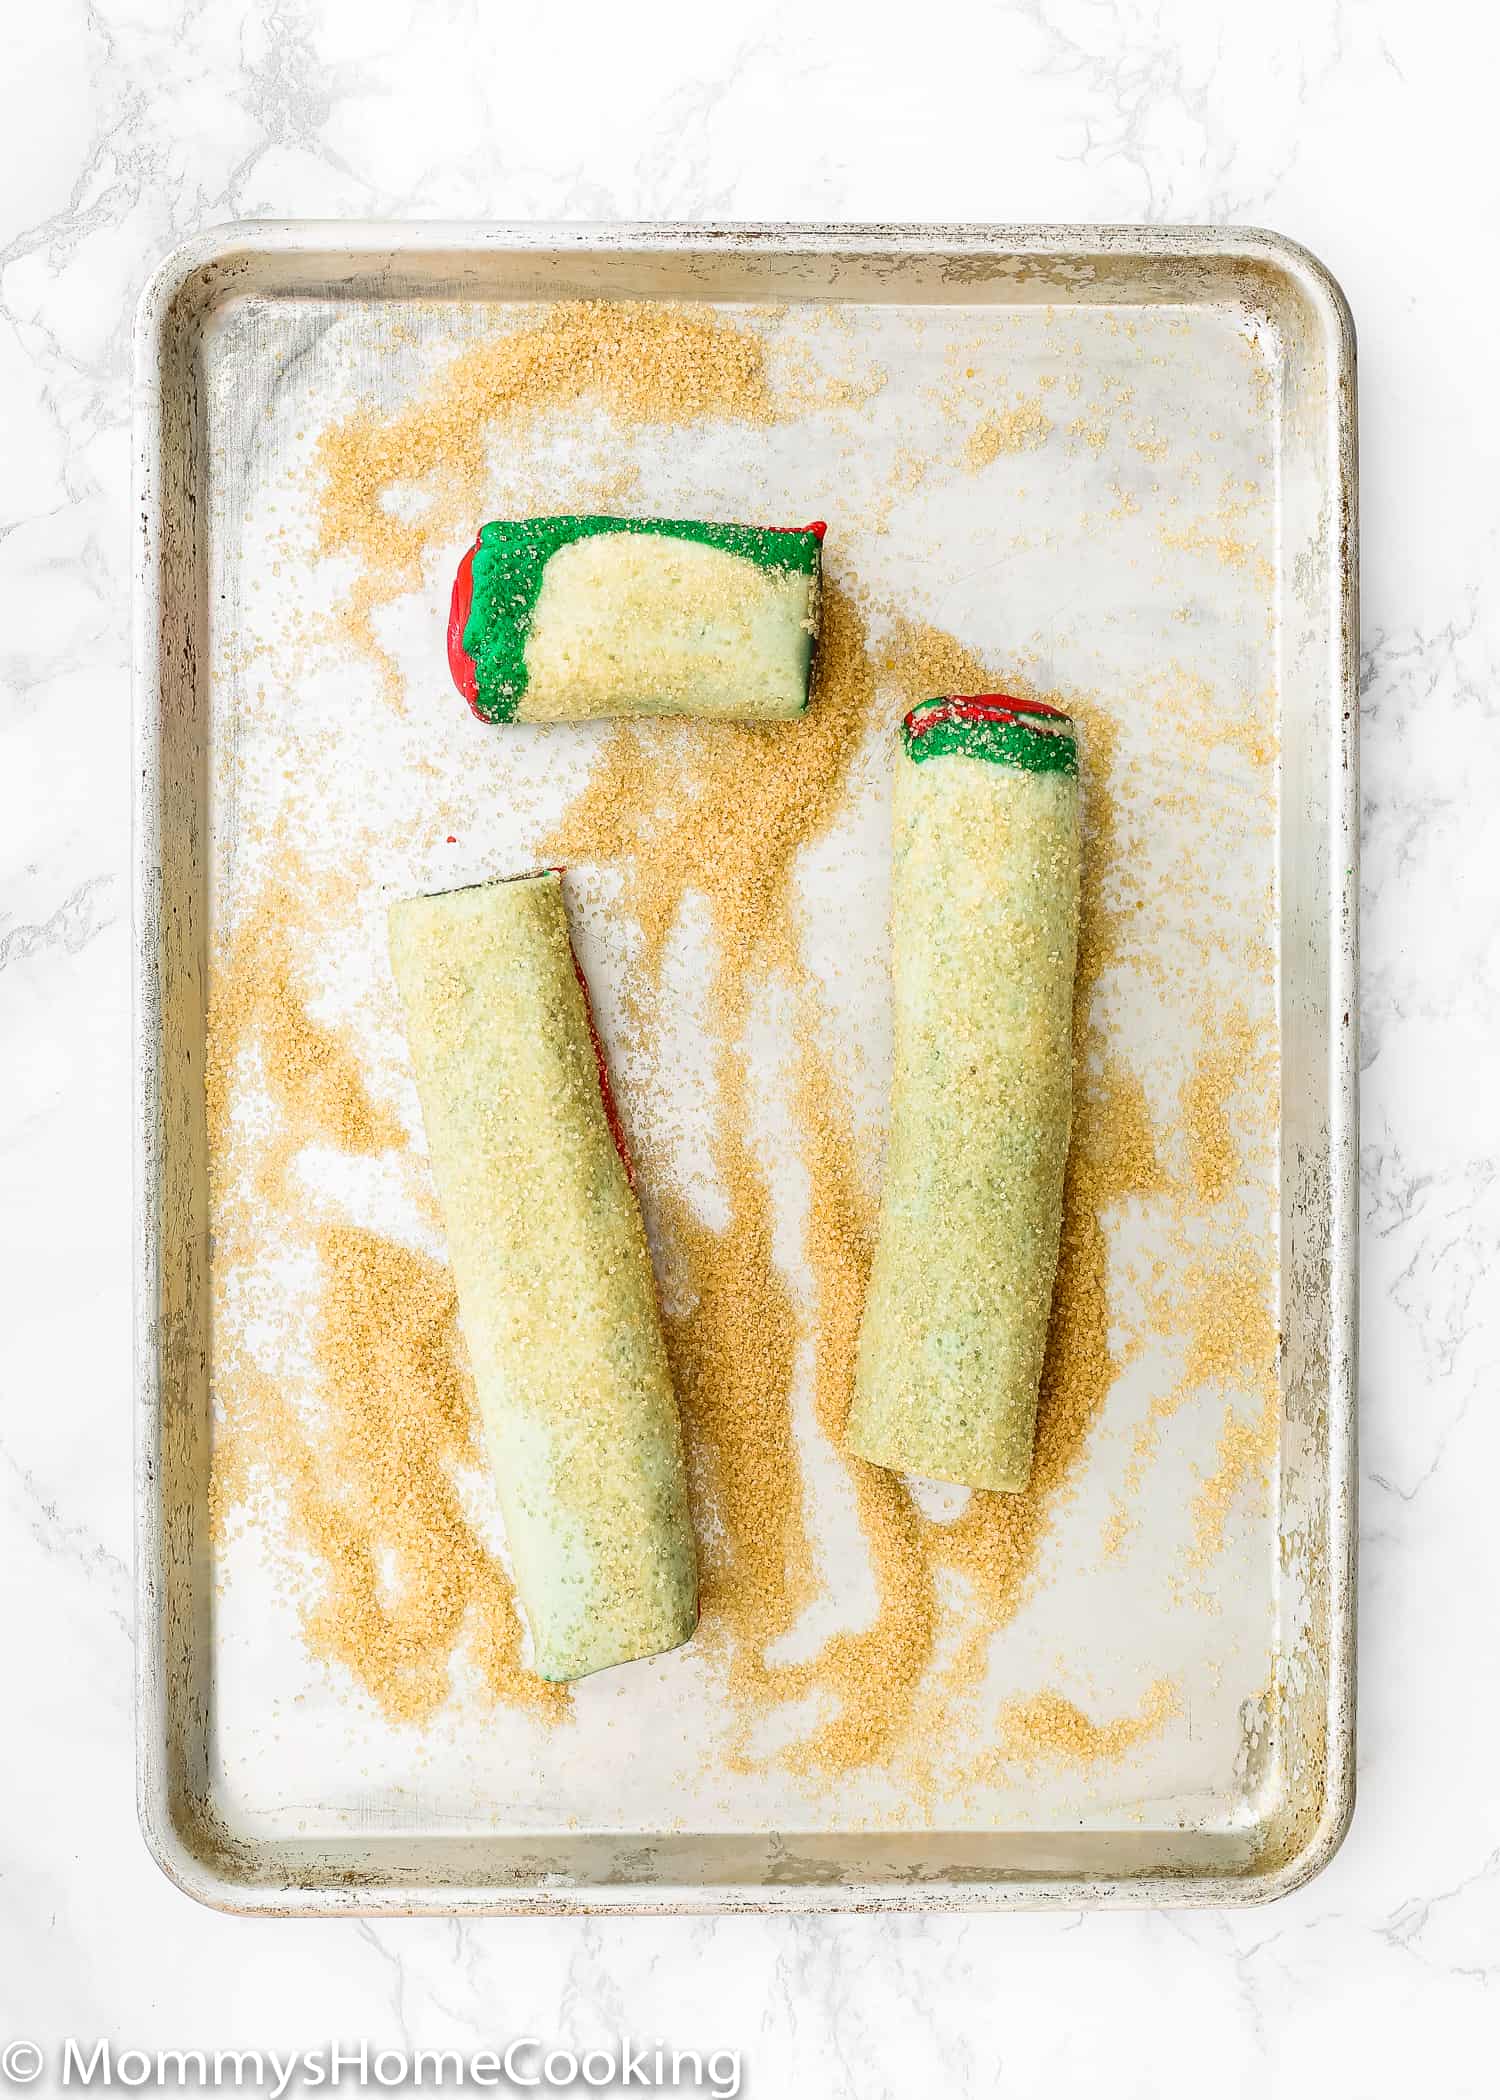  Eggless Icebox Christmas Cookies logs on a baking tray